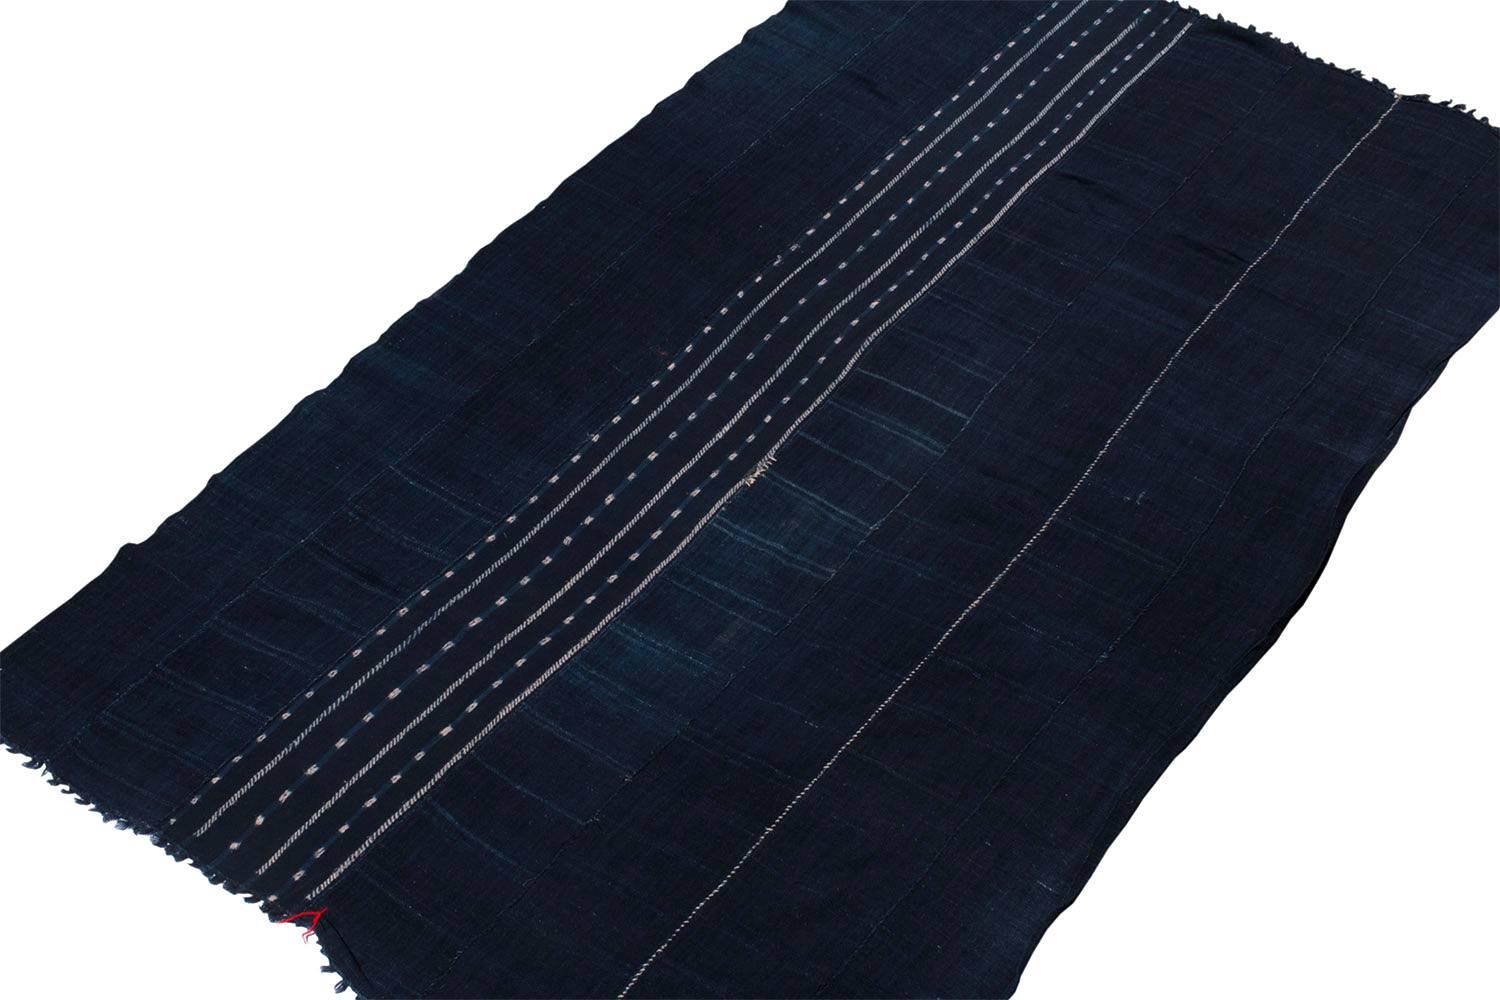 We are not sure exactly who made this wrap, it certainly is from West Africa- perhaps Burkina Faso.
An intriguing piece, with luminous indigo, very soft hand spun cotton and a minimalist pattern. Even the stitching is artistic!
Finished nicely on